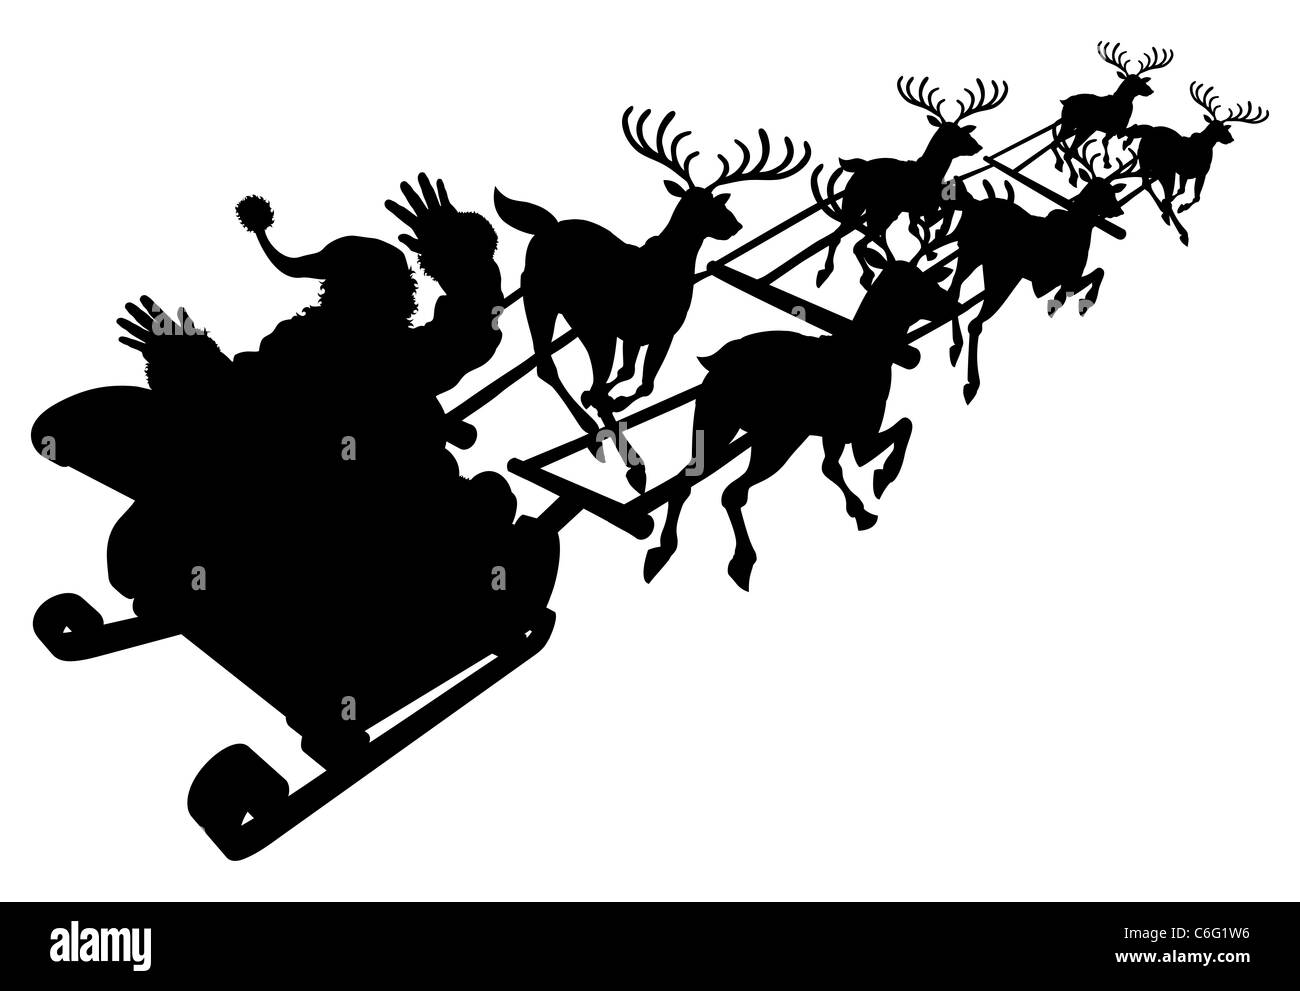 Santa in his Christmas sled or sleigh in silhouette Stock Photo